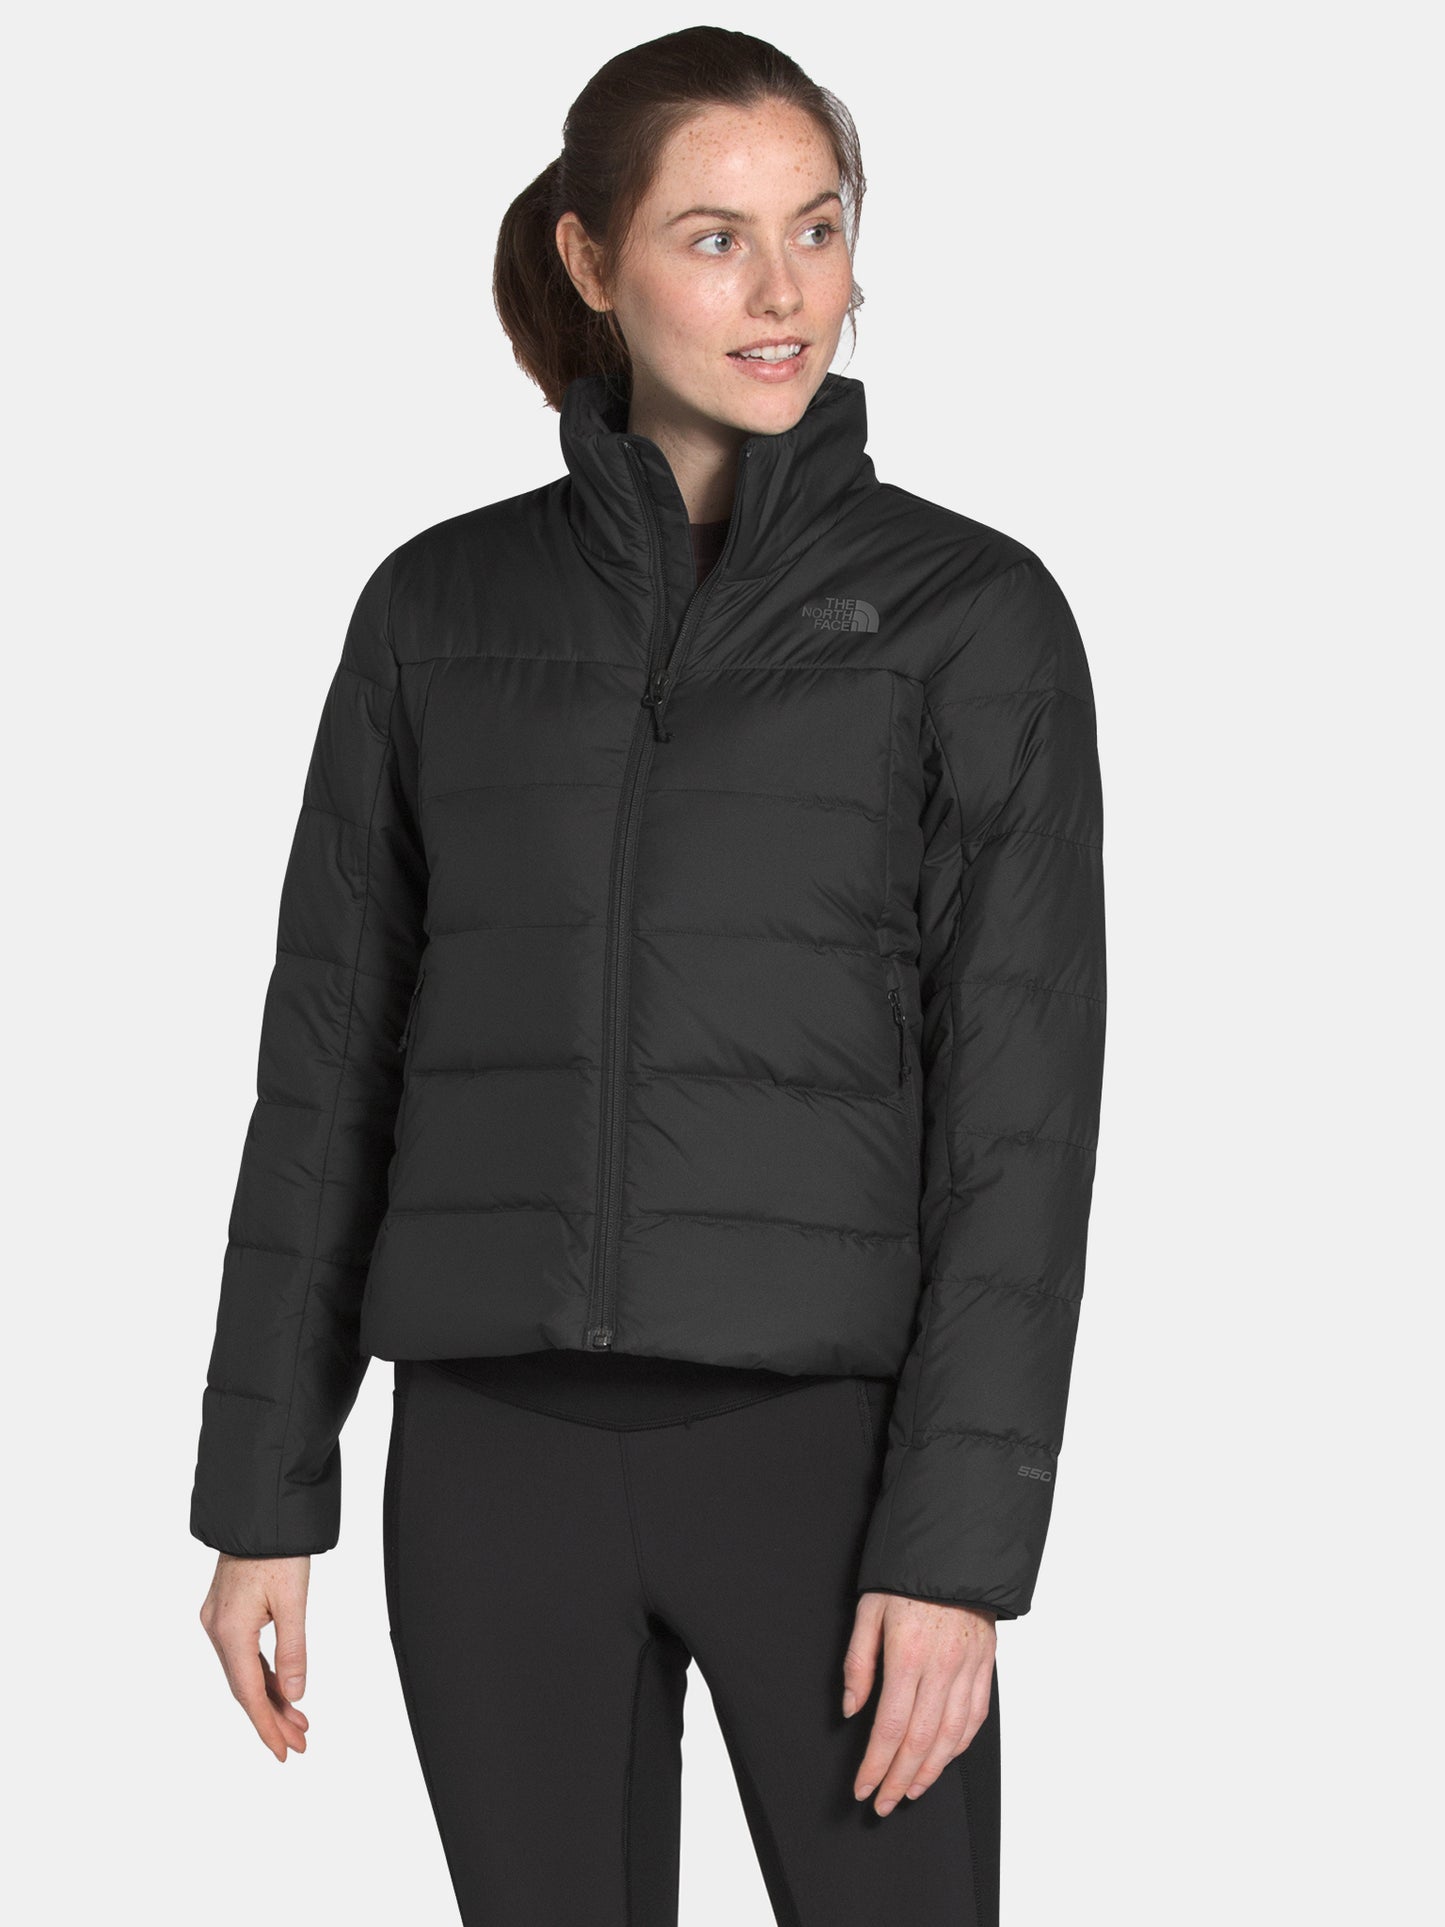 The North Face Women's Vallecitos Jacket